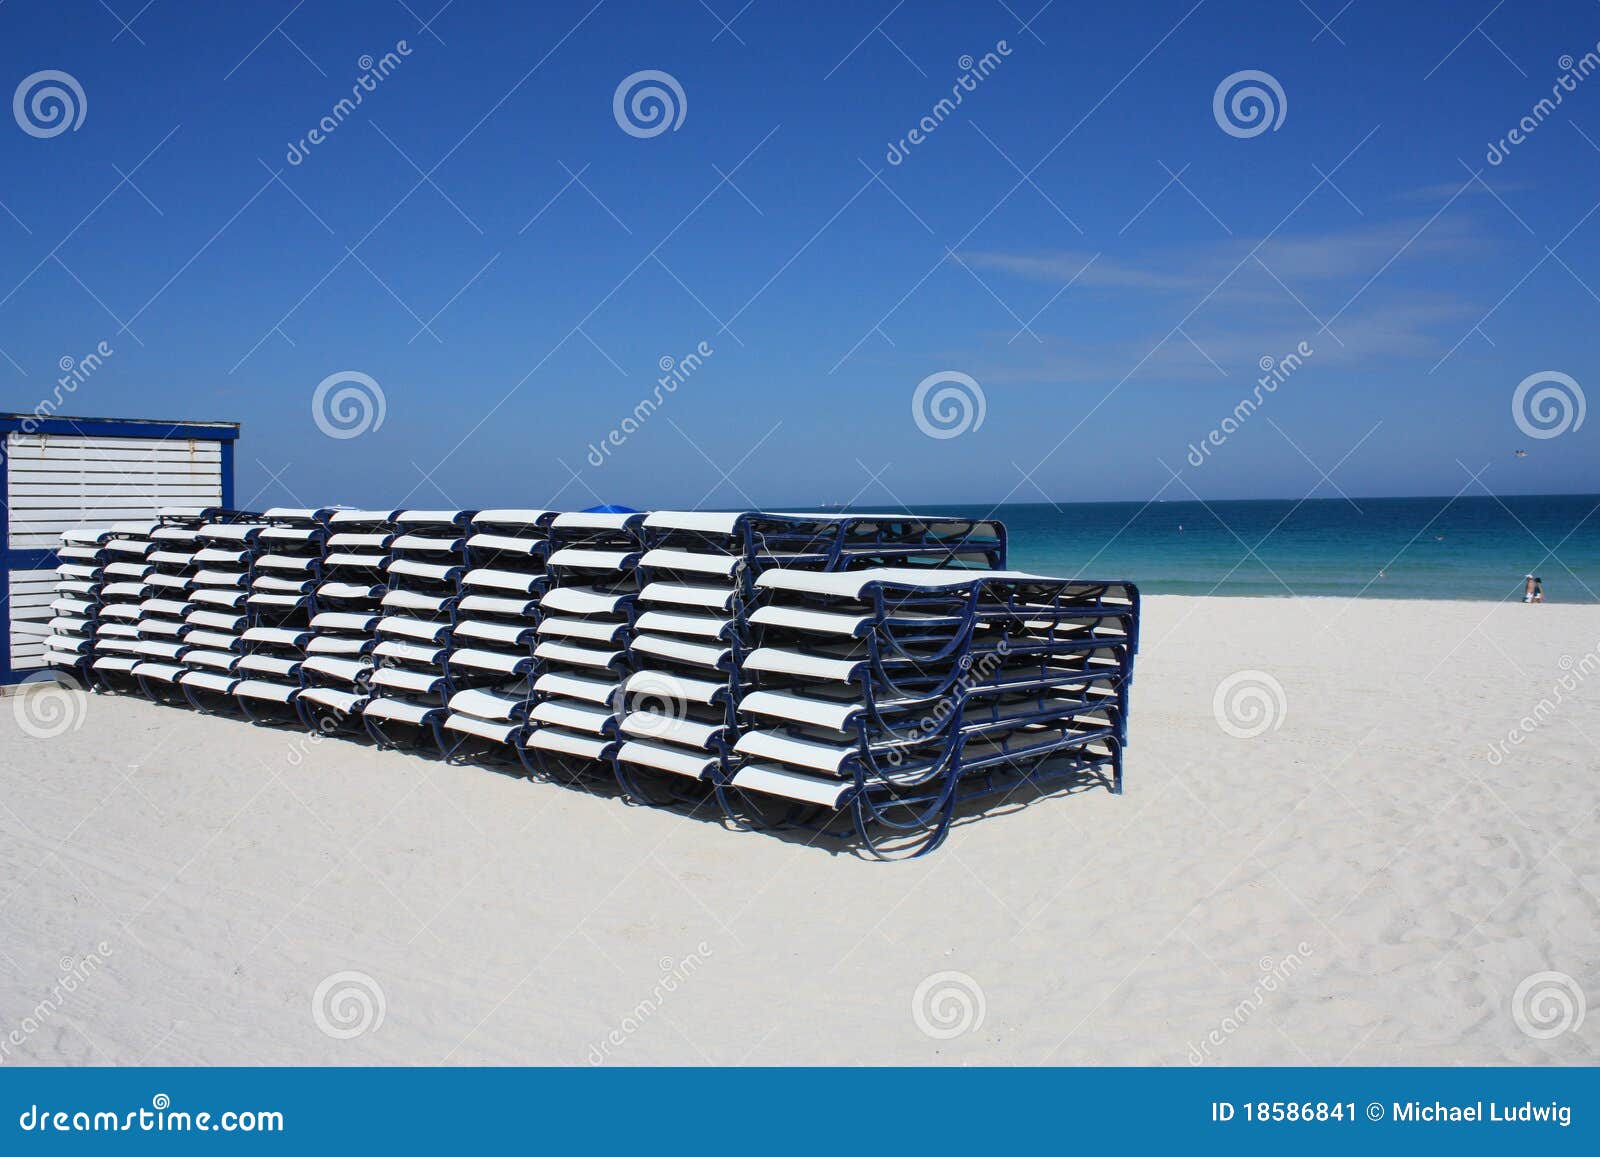 Stack of beach chairs on South Beach, Miami, Florida